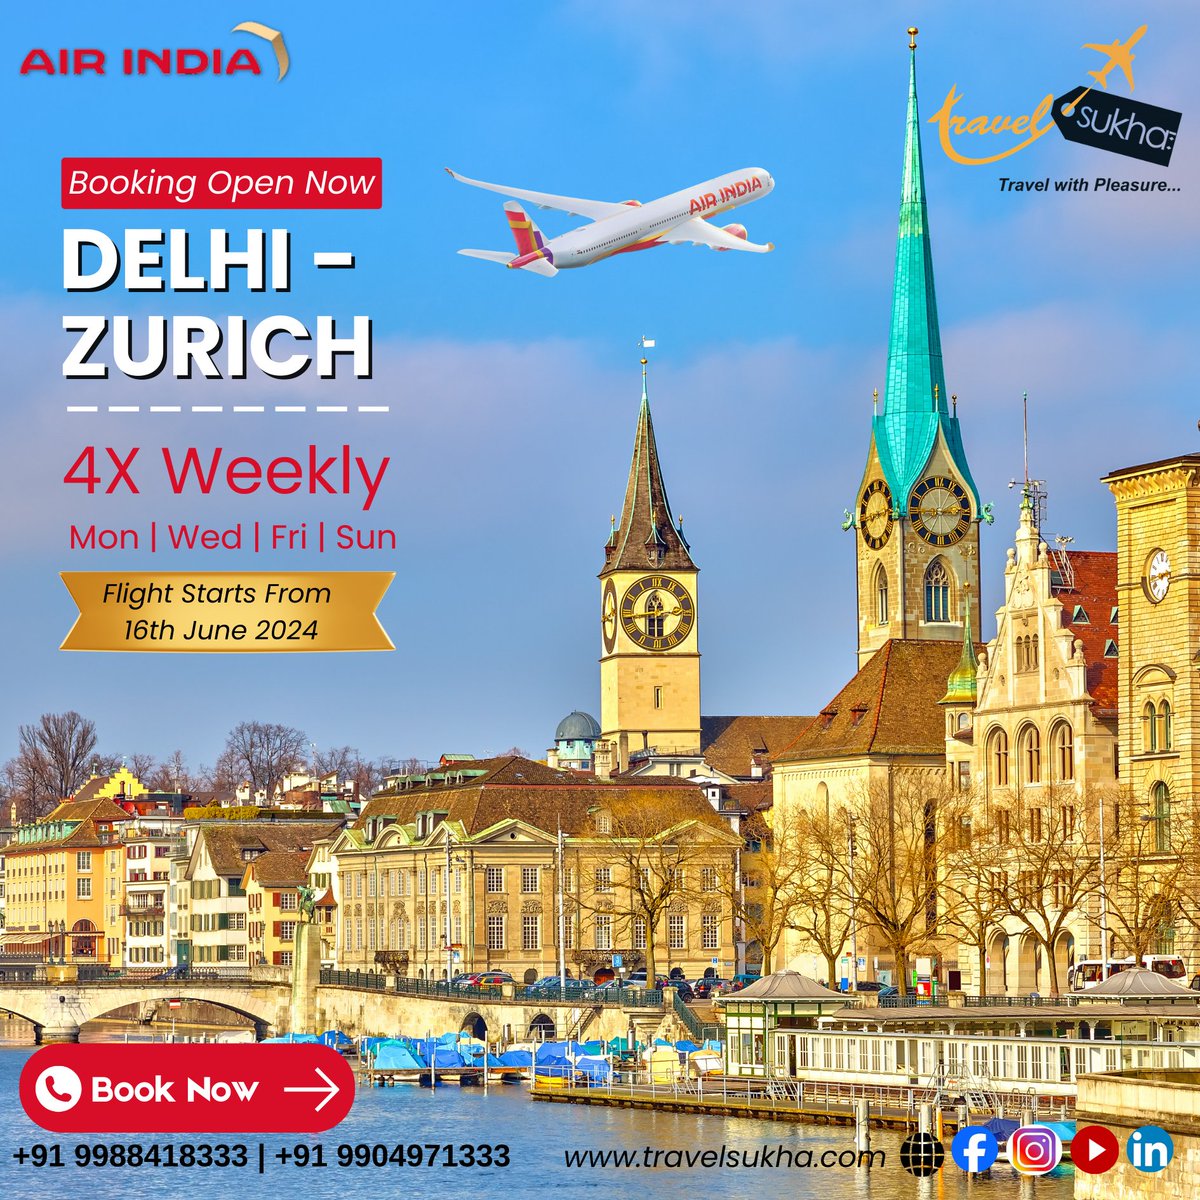 Adventure awaits with Travel Sukha! ✈️📷 Discover the beauty of Zurich with our new flight from Delhi starting June 16th. #TravelSukha #DelhiToZurich #NewFlight #TravelTuesday #Wanderlust #AdventureAwaits #DelhiToZurich #zurich #delhi #airindiaflight #airindia #hindustanzindabad